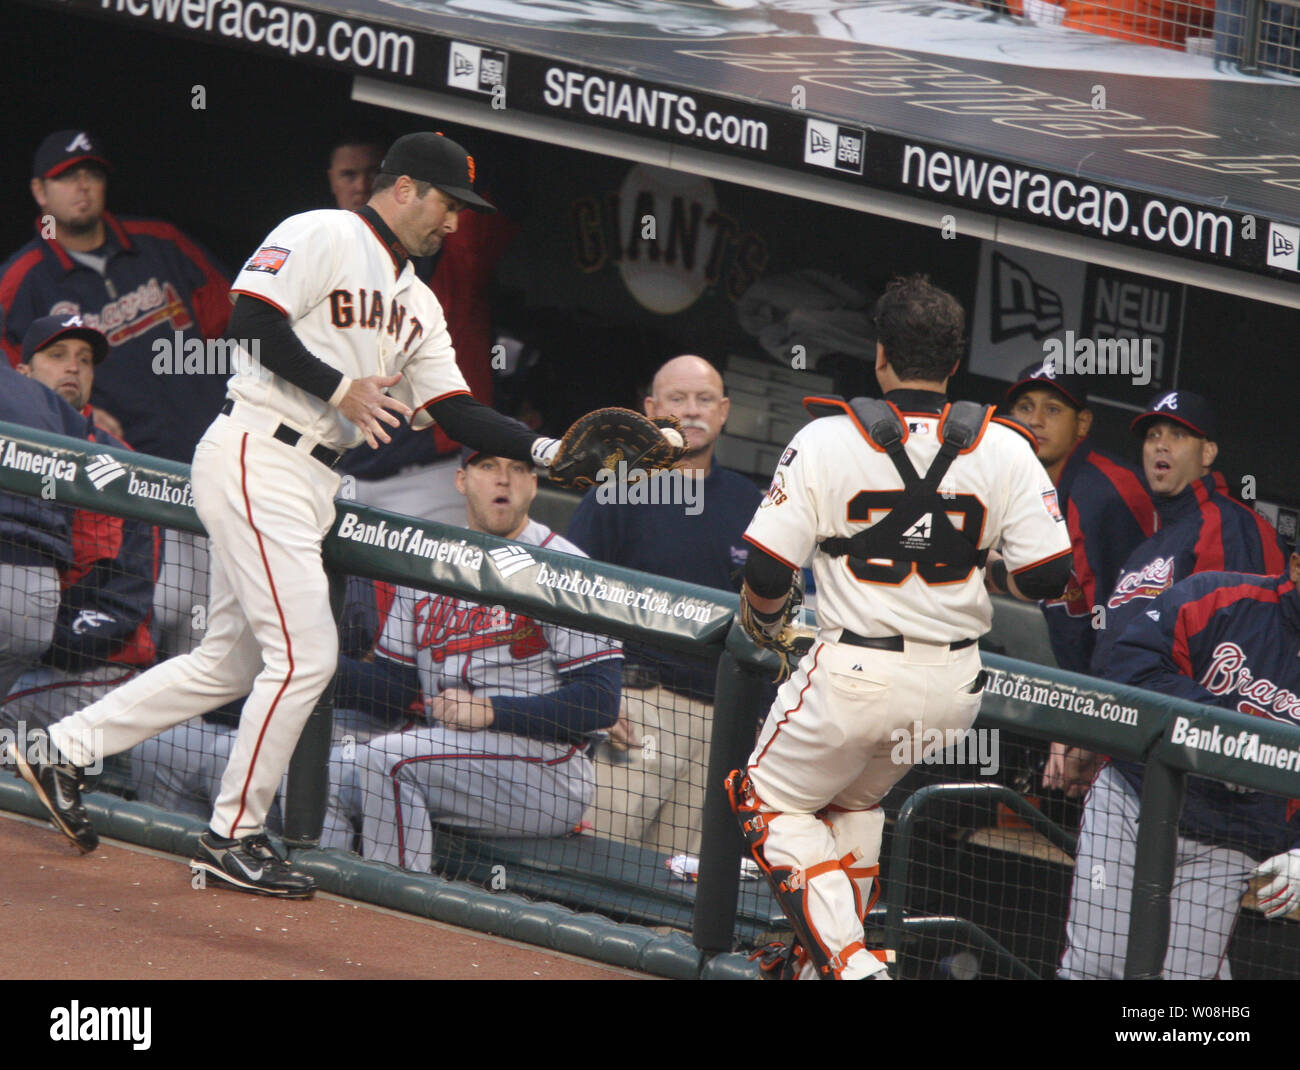 San Francisco Giants first baseman Rich Aurilia  (L) catches a pop foul by Atlanta Braves Yunel Escobar in the Atlanta dugout in the third inning  at AT&T Park in San Francisco on July 25, 2007.  Catcher Guillermo Rodriguez (39) looks on as he Giants defeated the Braves 2-1.  (UPI Photo/Terry Schmitt) Stock Photo